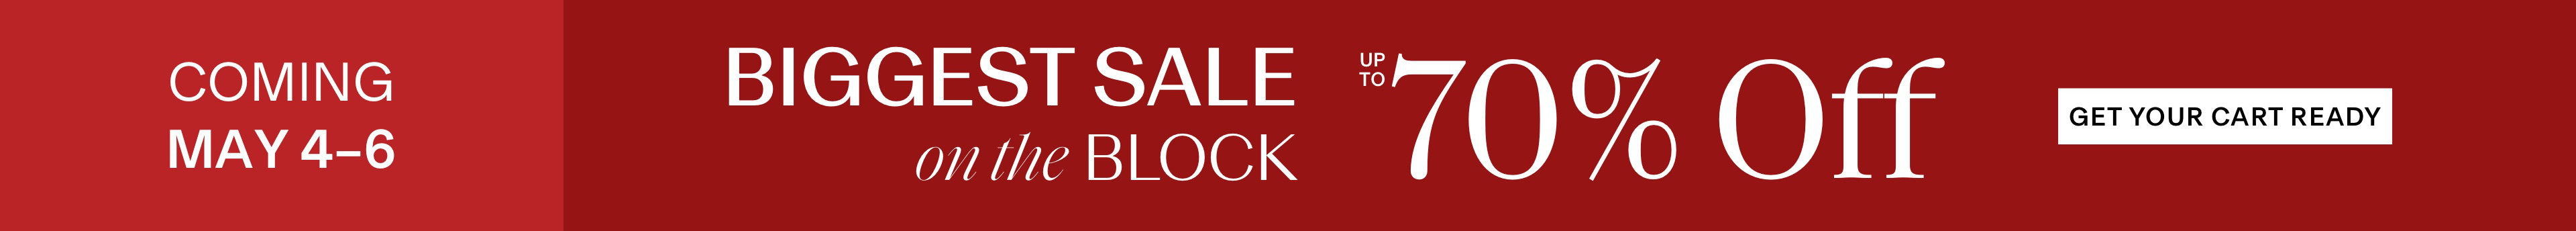 The Biggest Sale on the Block